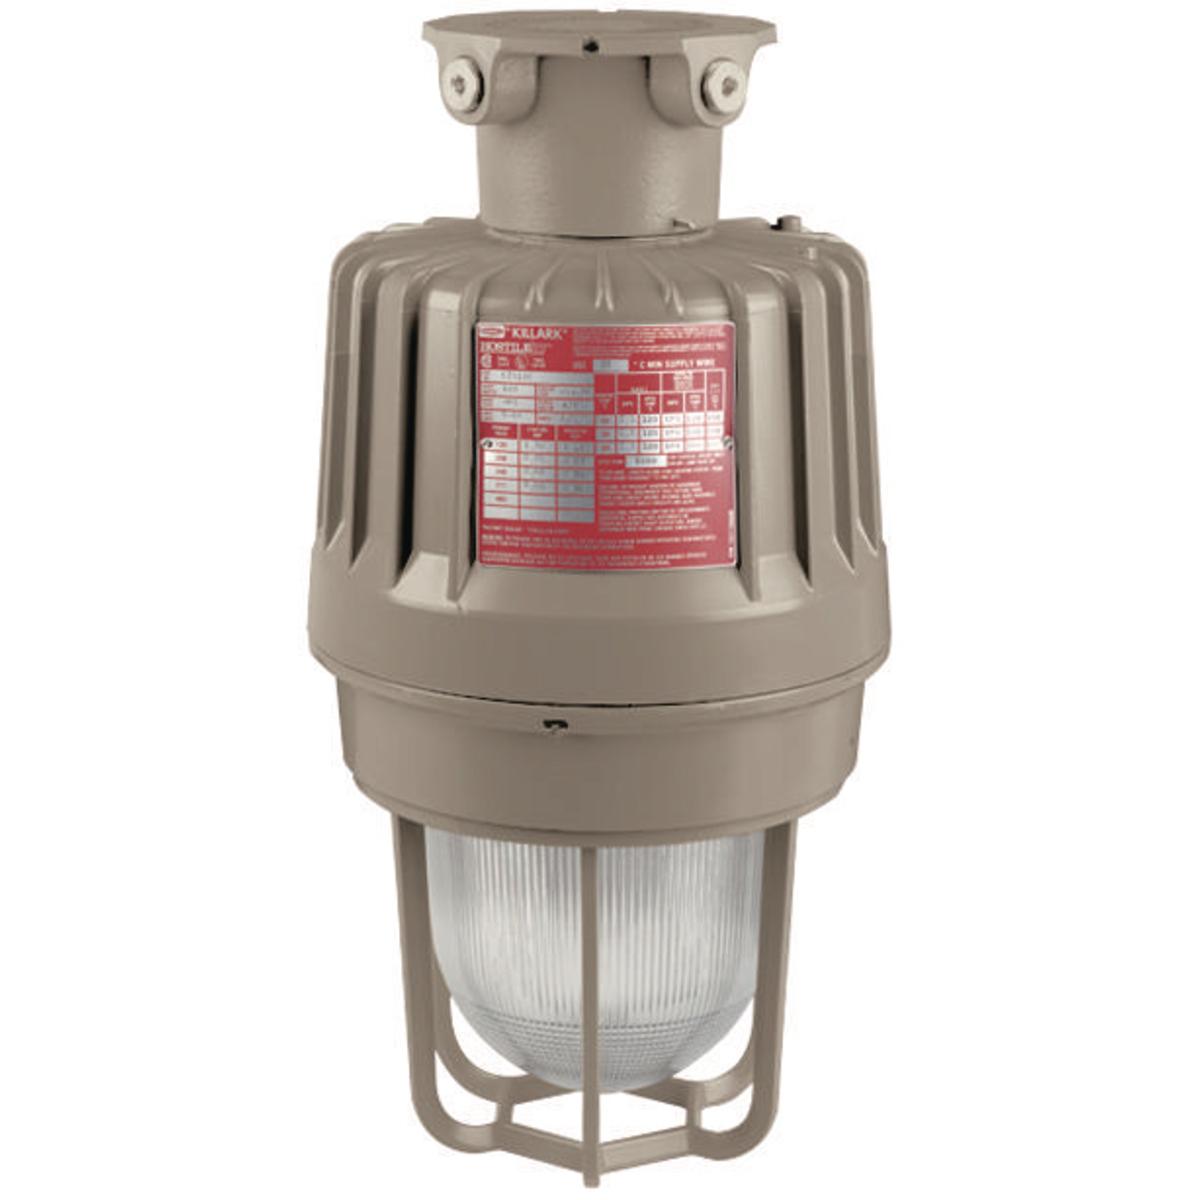 Hubbell EZS075X3G 70W 480V High Pressure Sodium 1" Ceiling Mount with Guard  ; Three light sources – High Pressure Sodium (50-400W), Metal Halide (70-400W) and Pulse Start Metal Halide (175-400W) ; Mounting choice –Pendant, ceiling, 25˚ stanchion or 90˚ wall mount, all wit